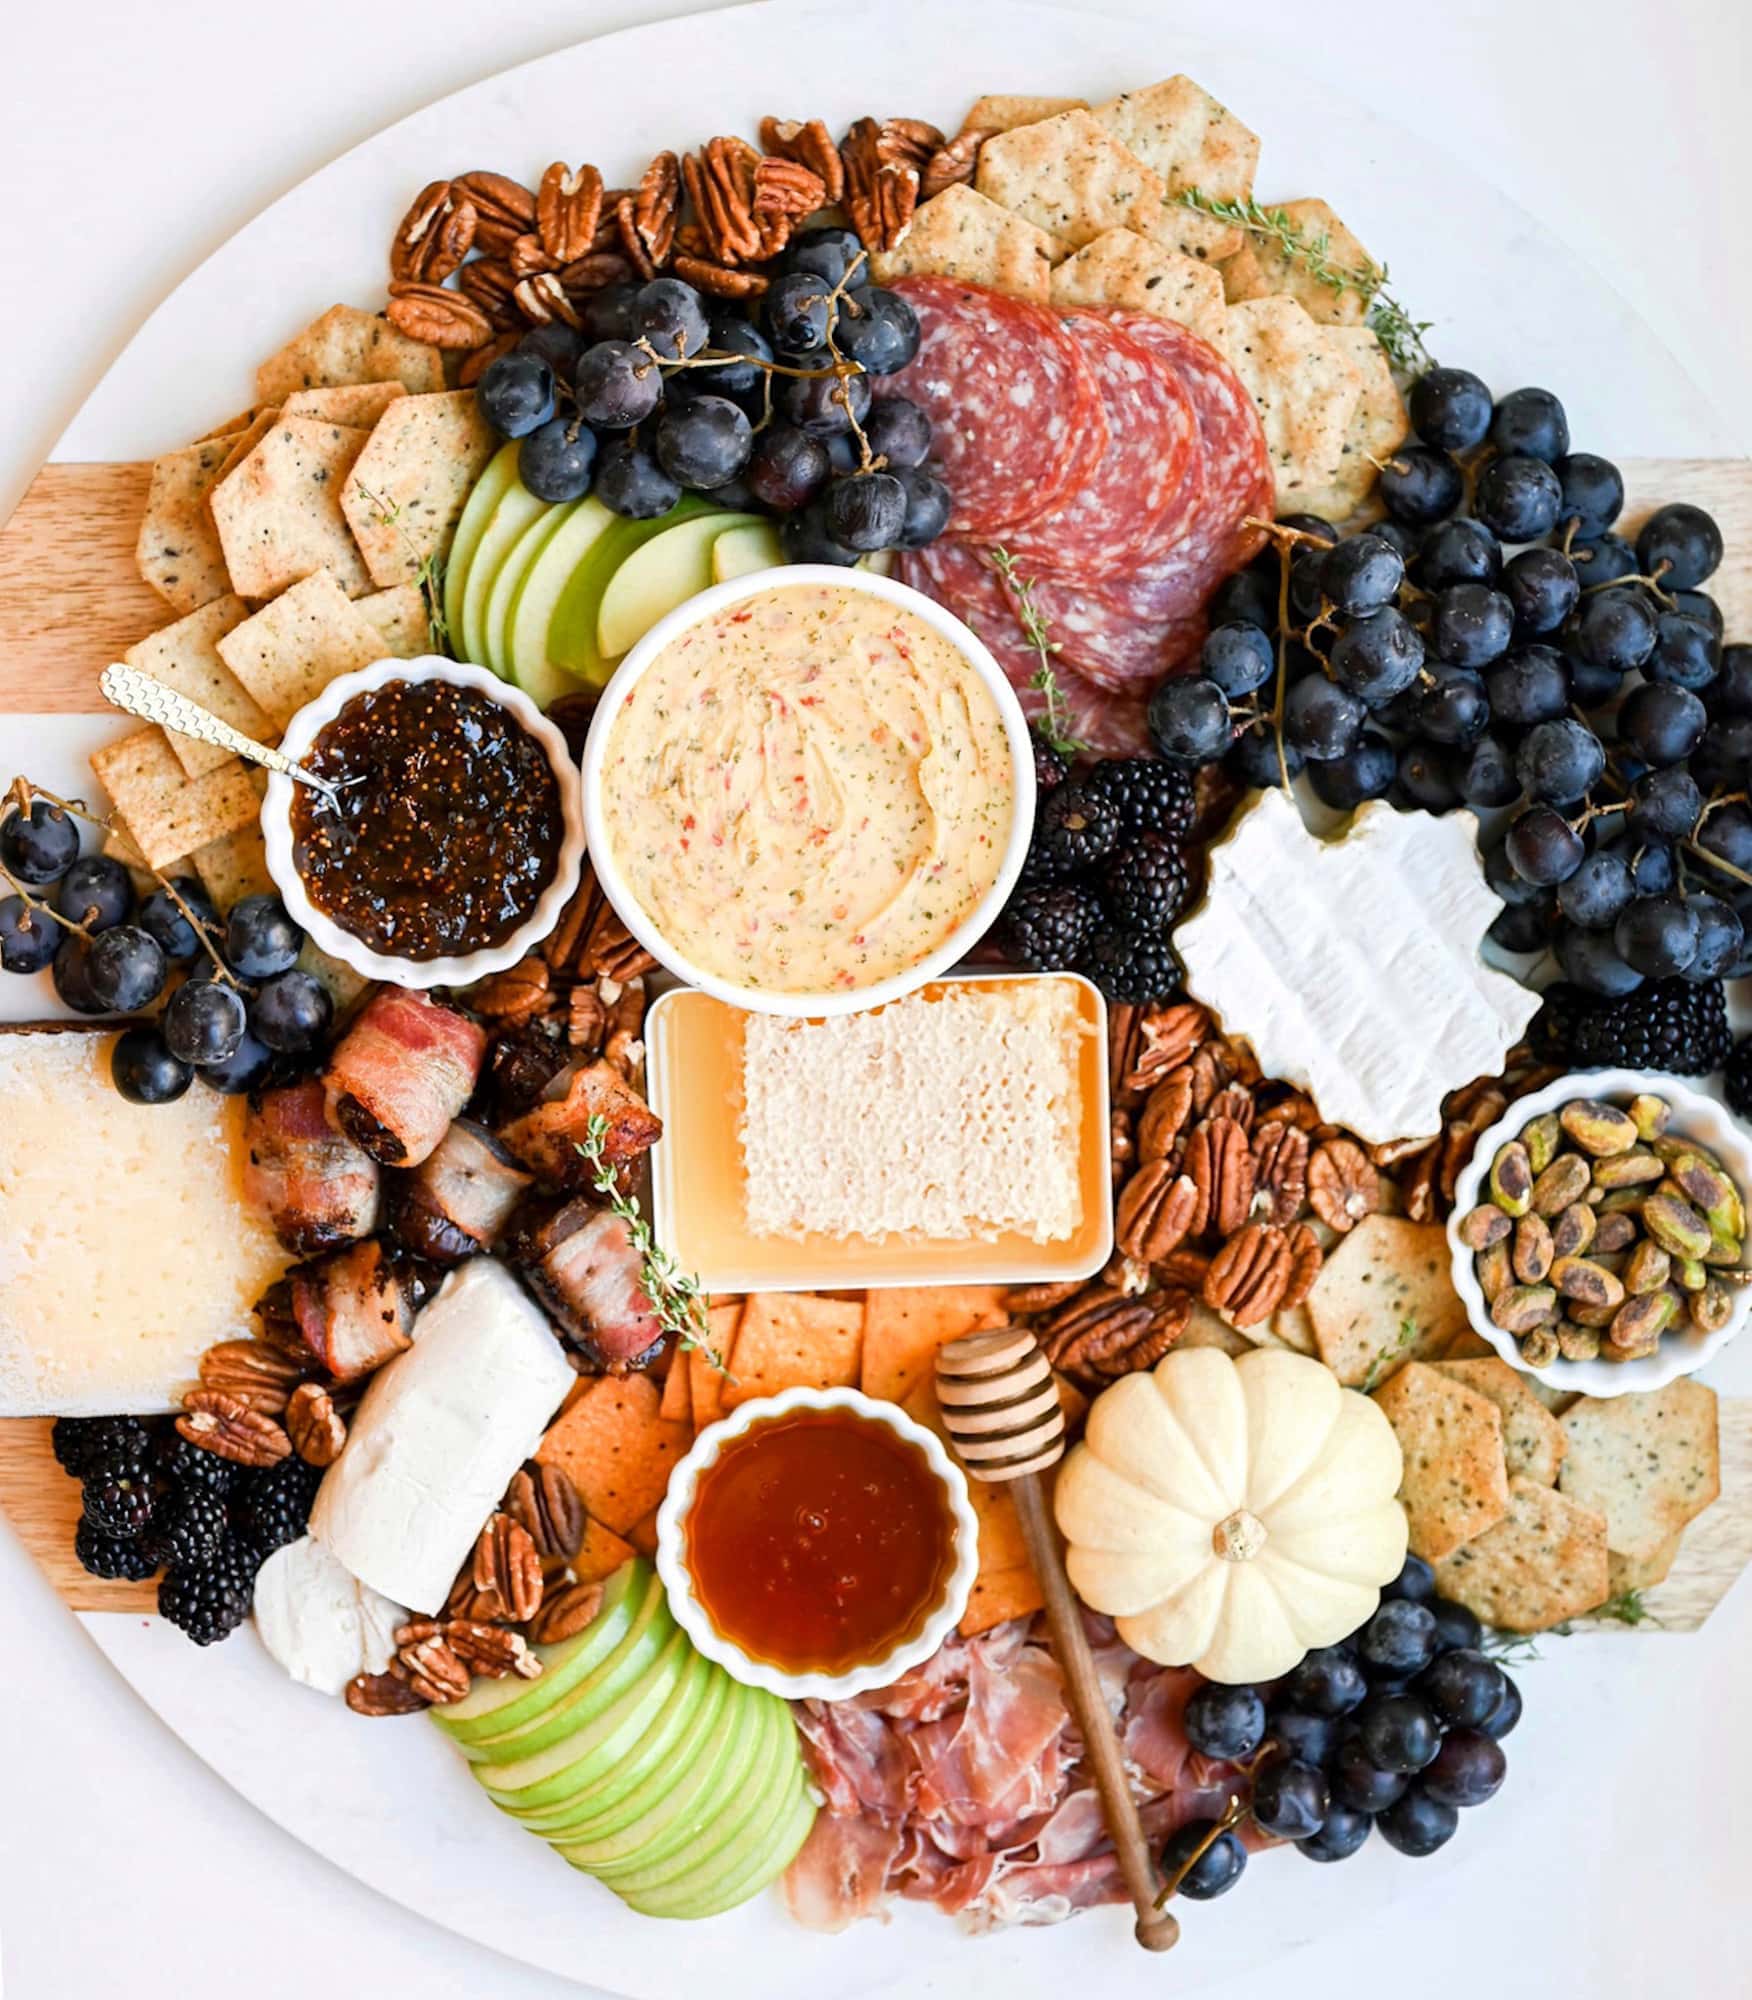 An aerial view of the full gluten-free charcuterie board used as the main image for the appetizers recipe category.